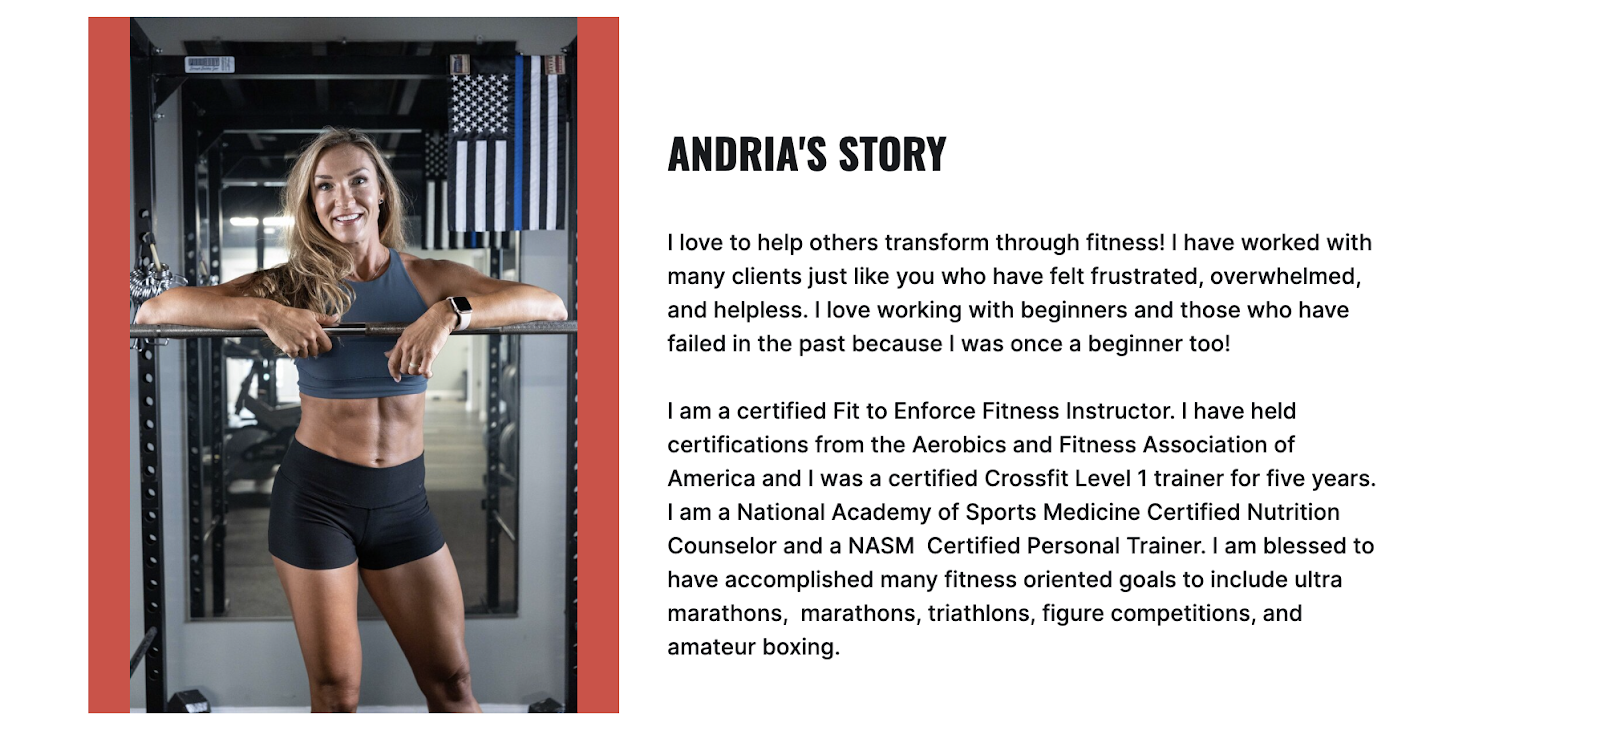 personal trainer biography